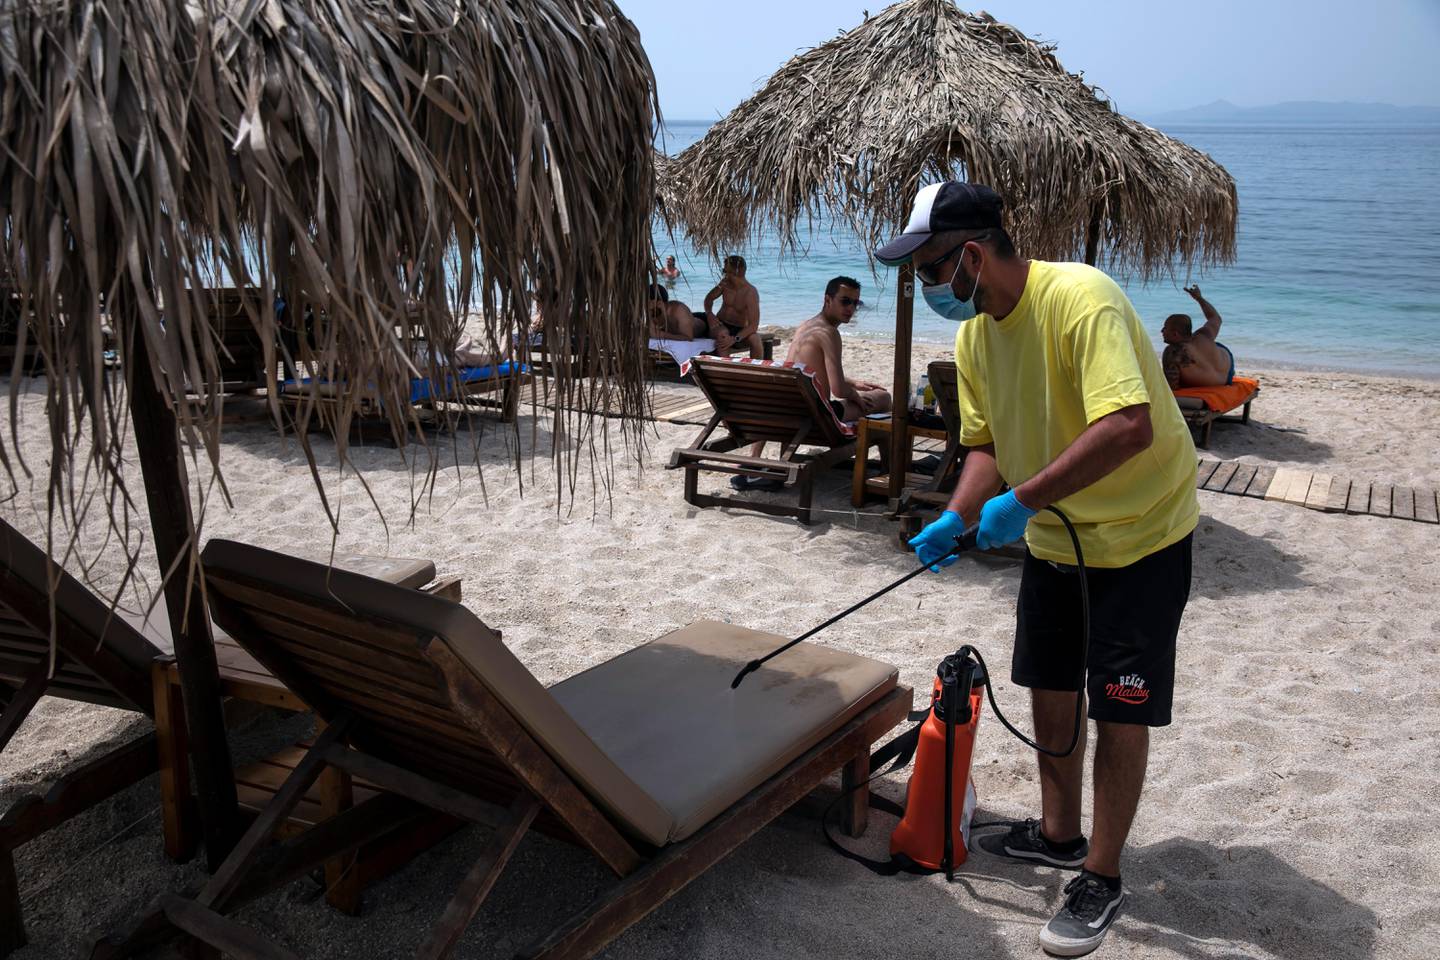 An employee disinfects sunbeds against coronavirus, at Alimos beach, near Athens, on Saturday, May 16, 2020. Greece allowed the reopening of organized beaches, where visitors pay to get in, from Saturday when a heat wave is expected to hit the country, a measure that would affect 515 beaches all over Greece, where shade umbrellas must be planted at least 4 meters (13 feet) apart, and a maximum 40 people will be allowed in every 1,000 square meters (11,000 square feet) of beach. (AP Photo/Yorgos Karahalis)